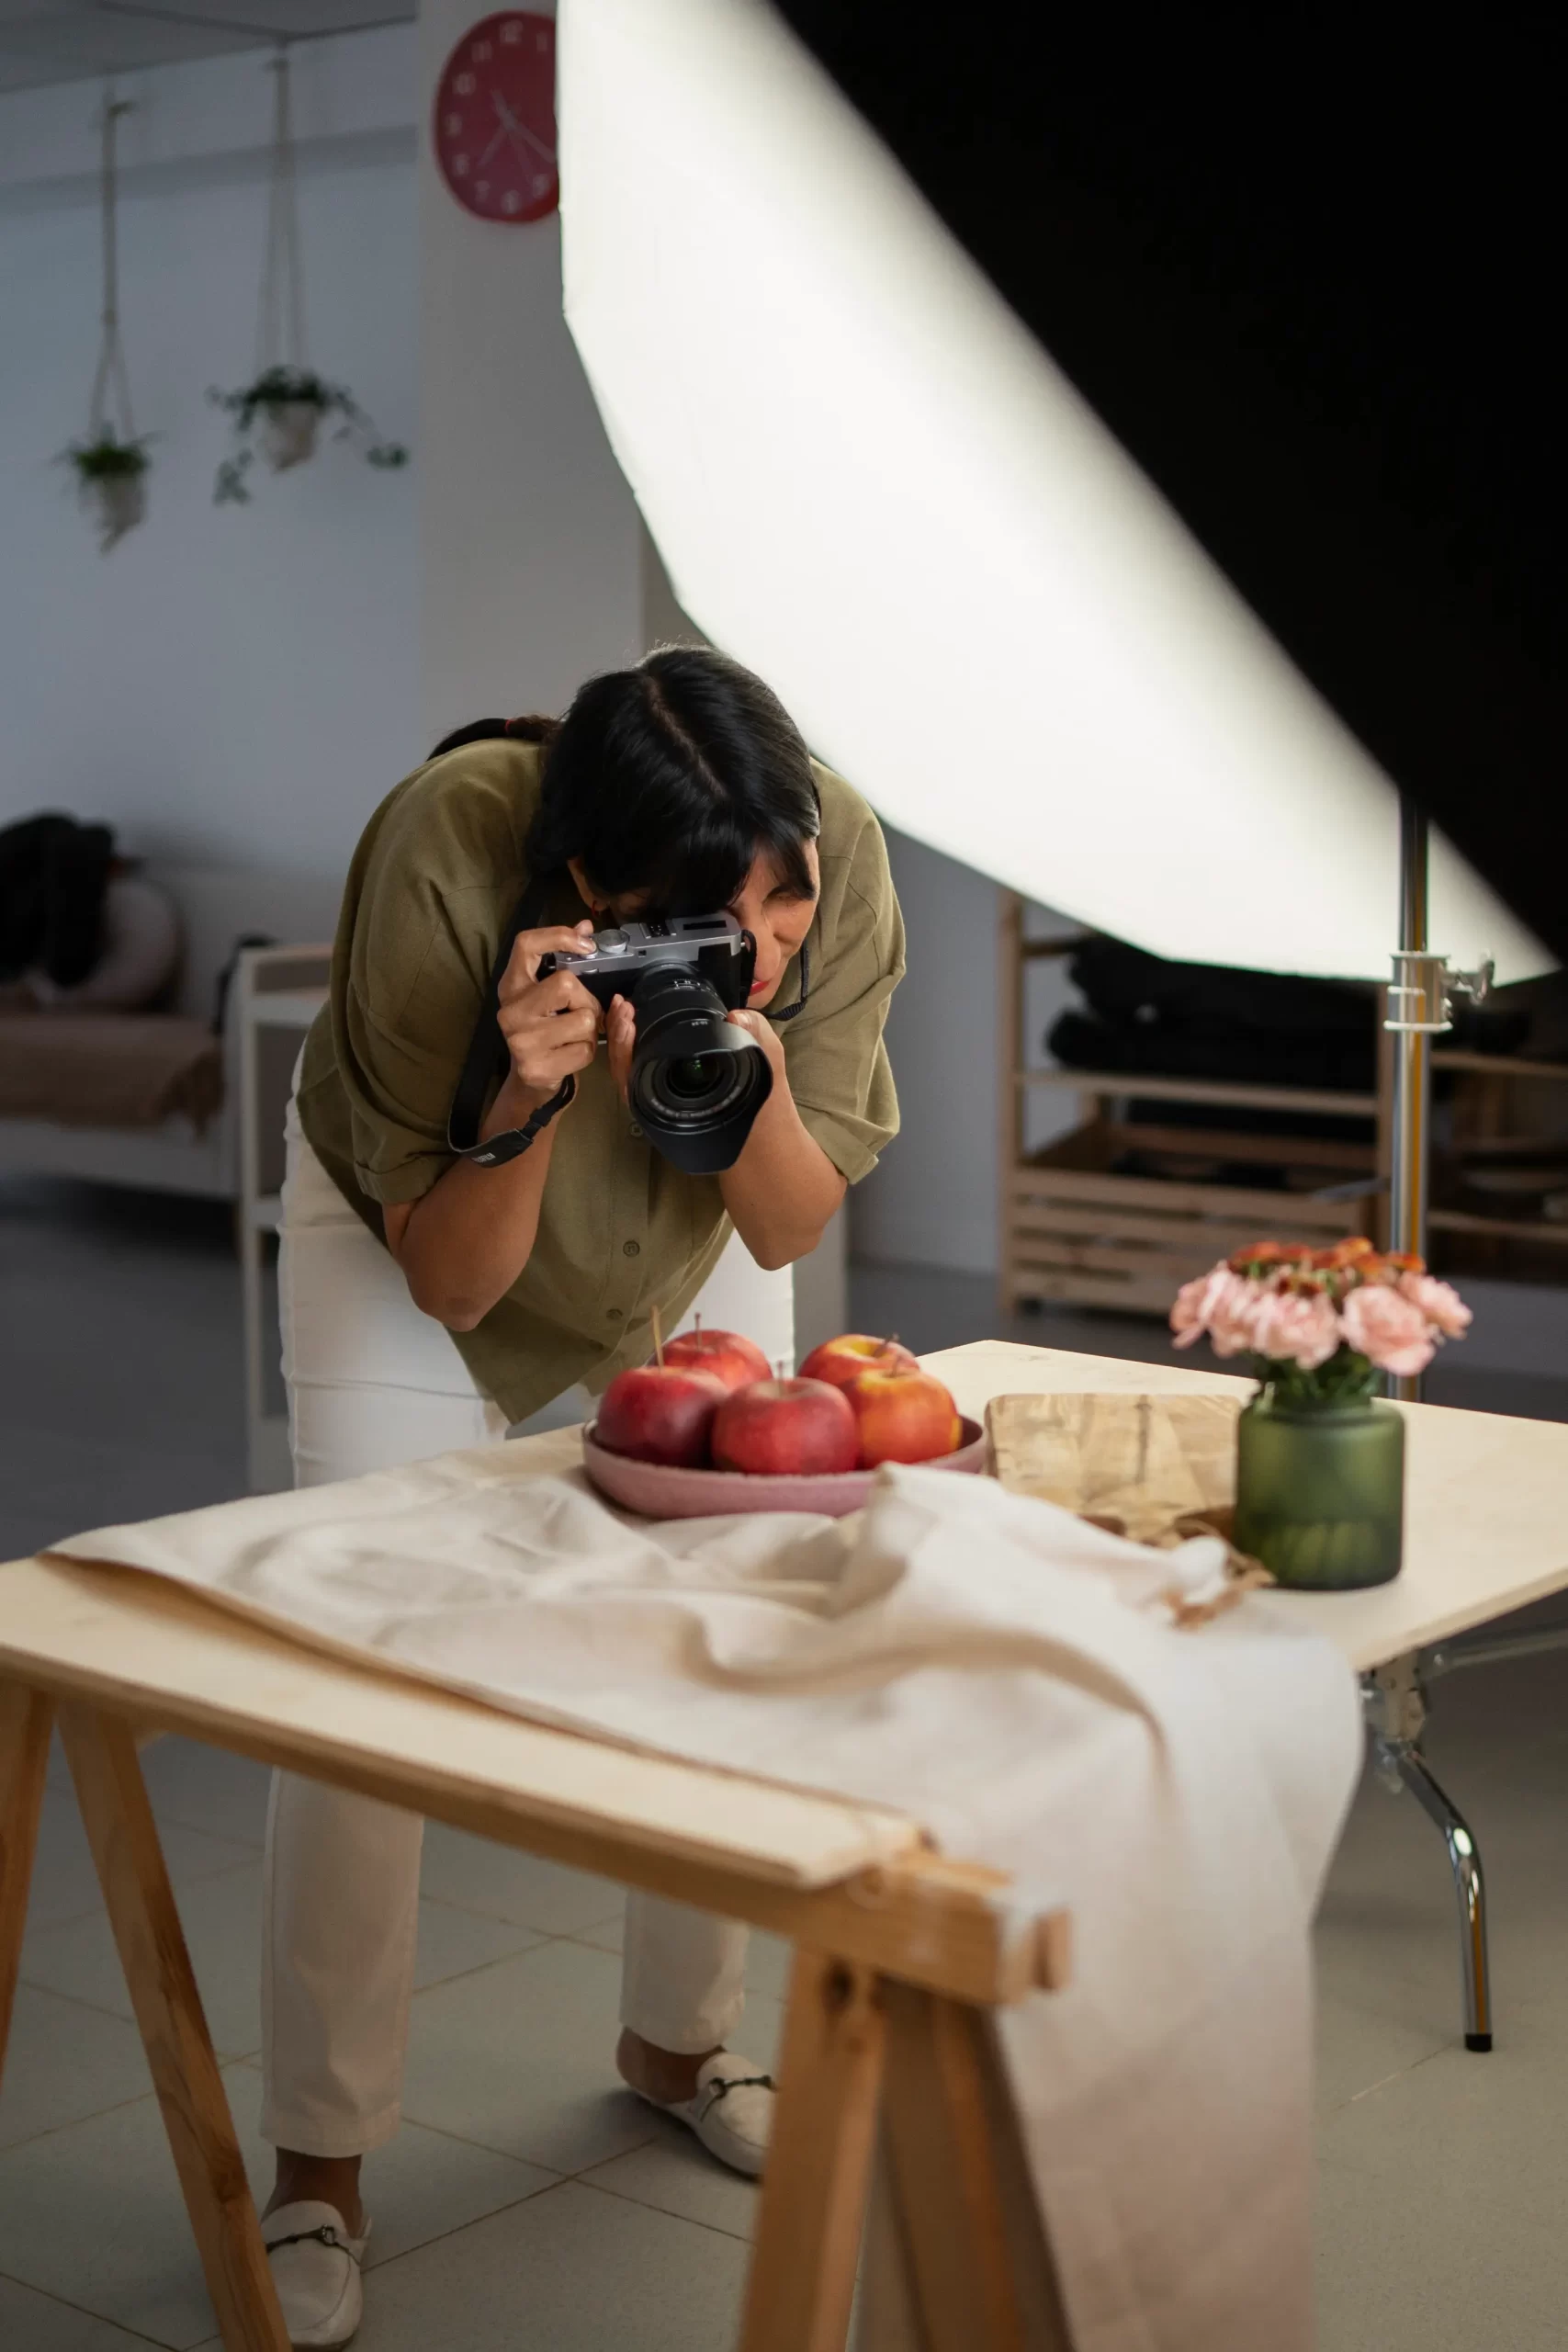 Best Photography Course Elevate Your Skills with Expert Guidance 